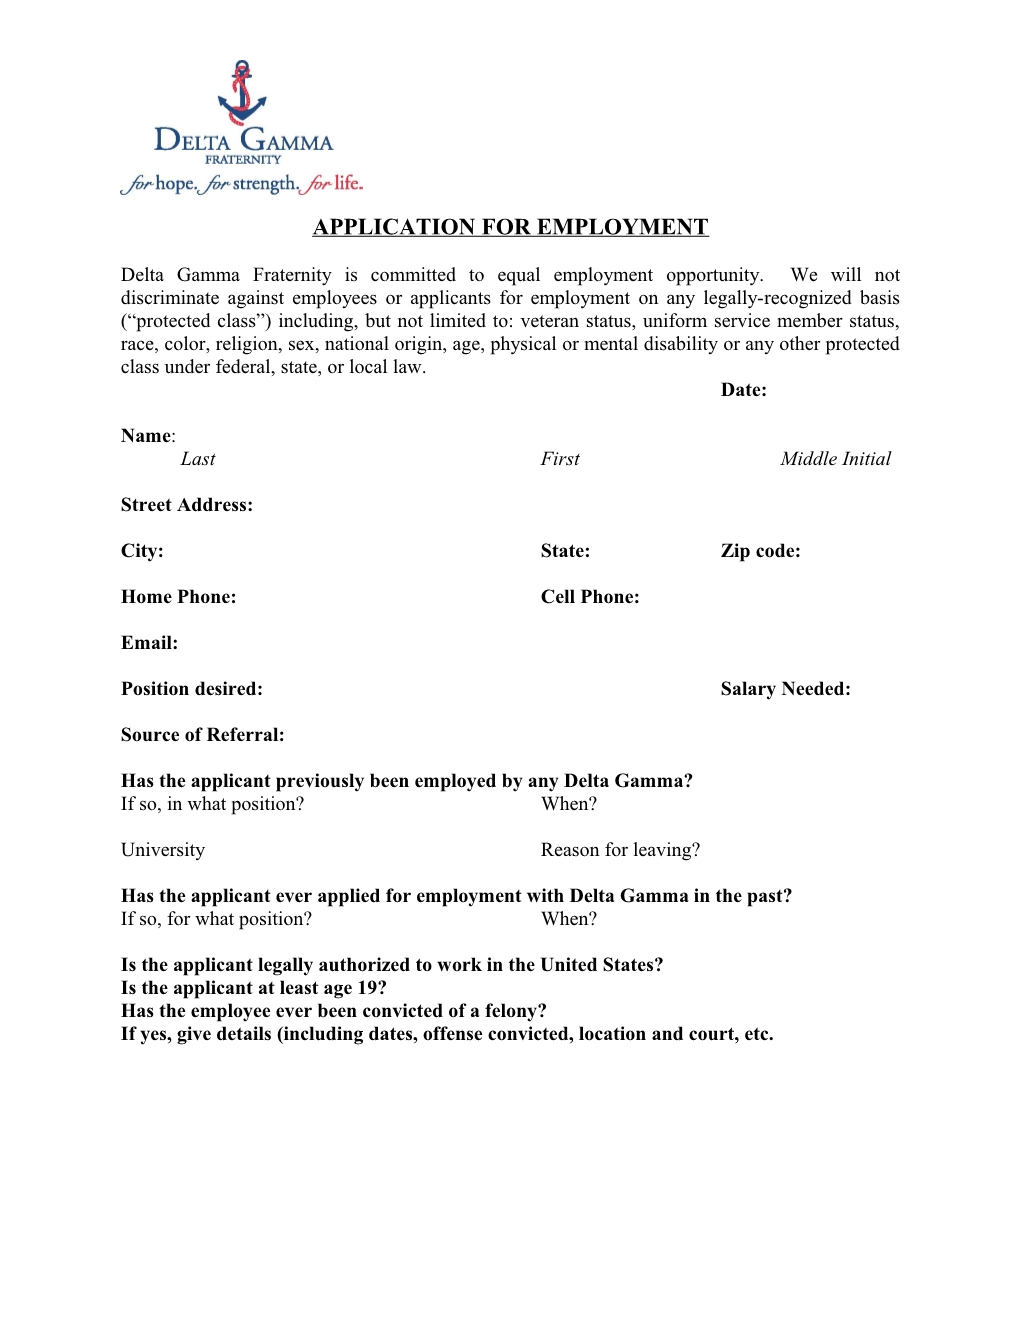 Application for Employment s116